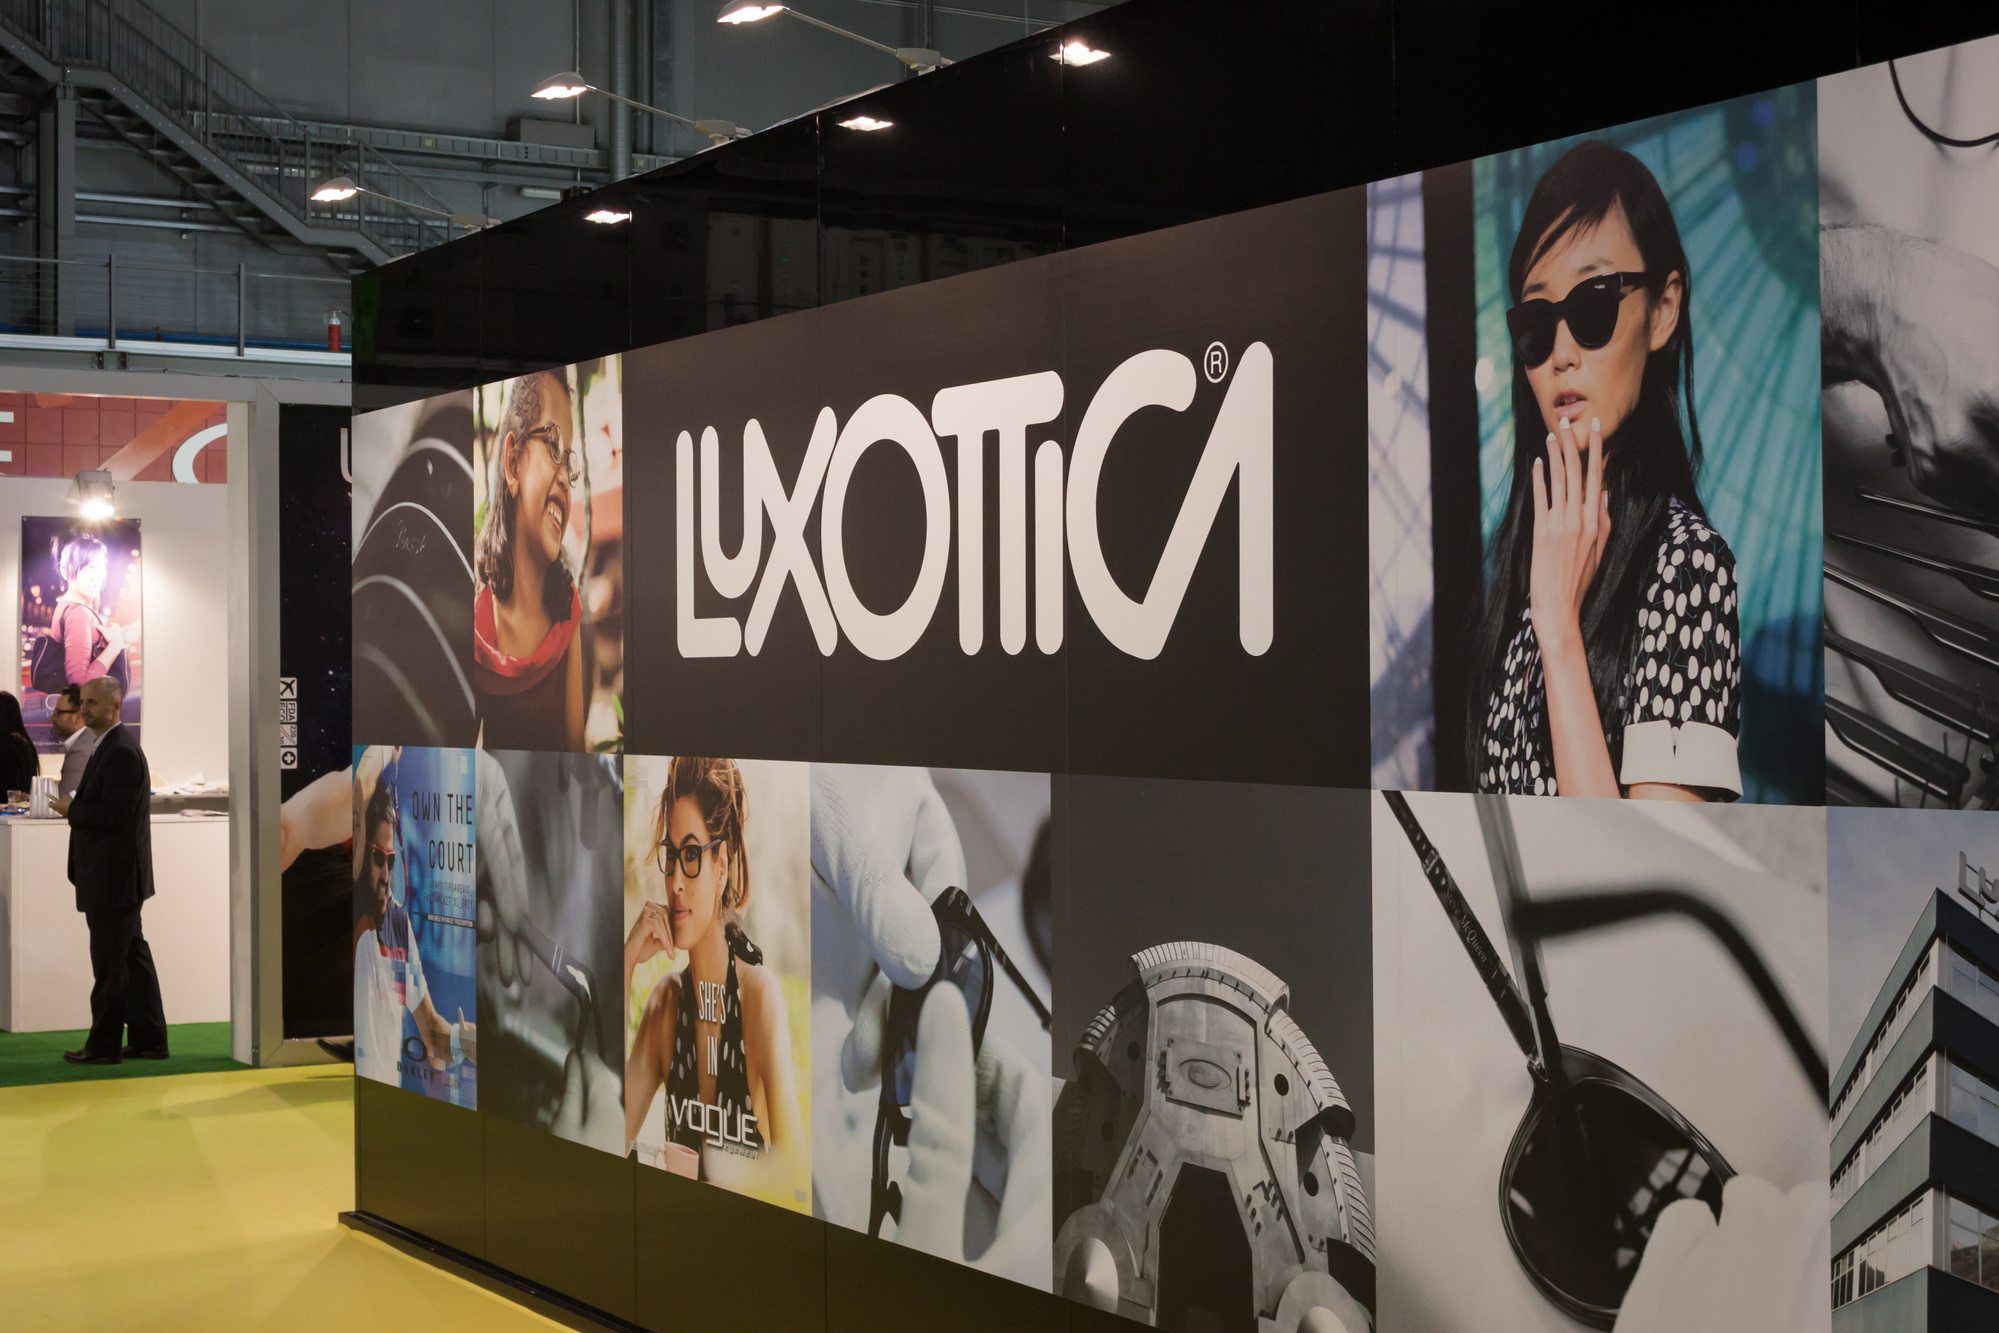 Luxottica Display regarding the Luxottica class action lawsuit filed. 